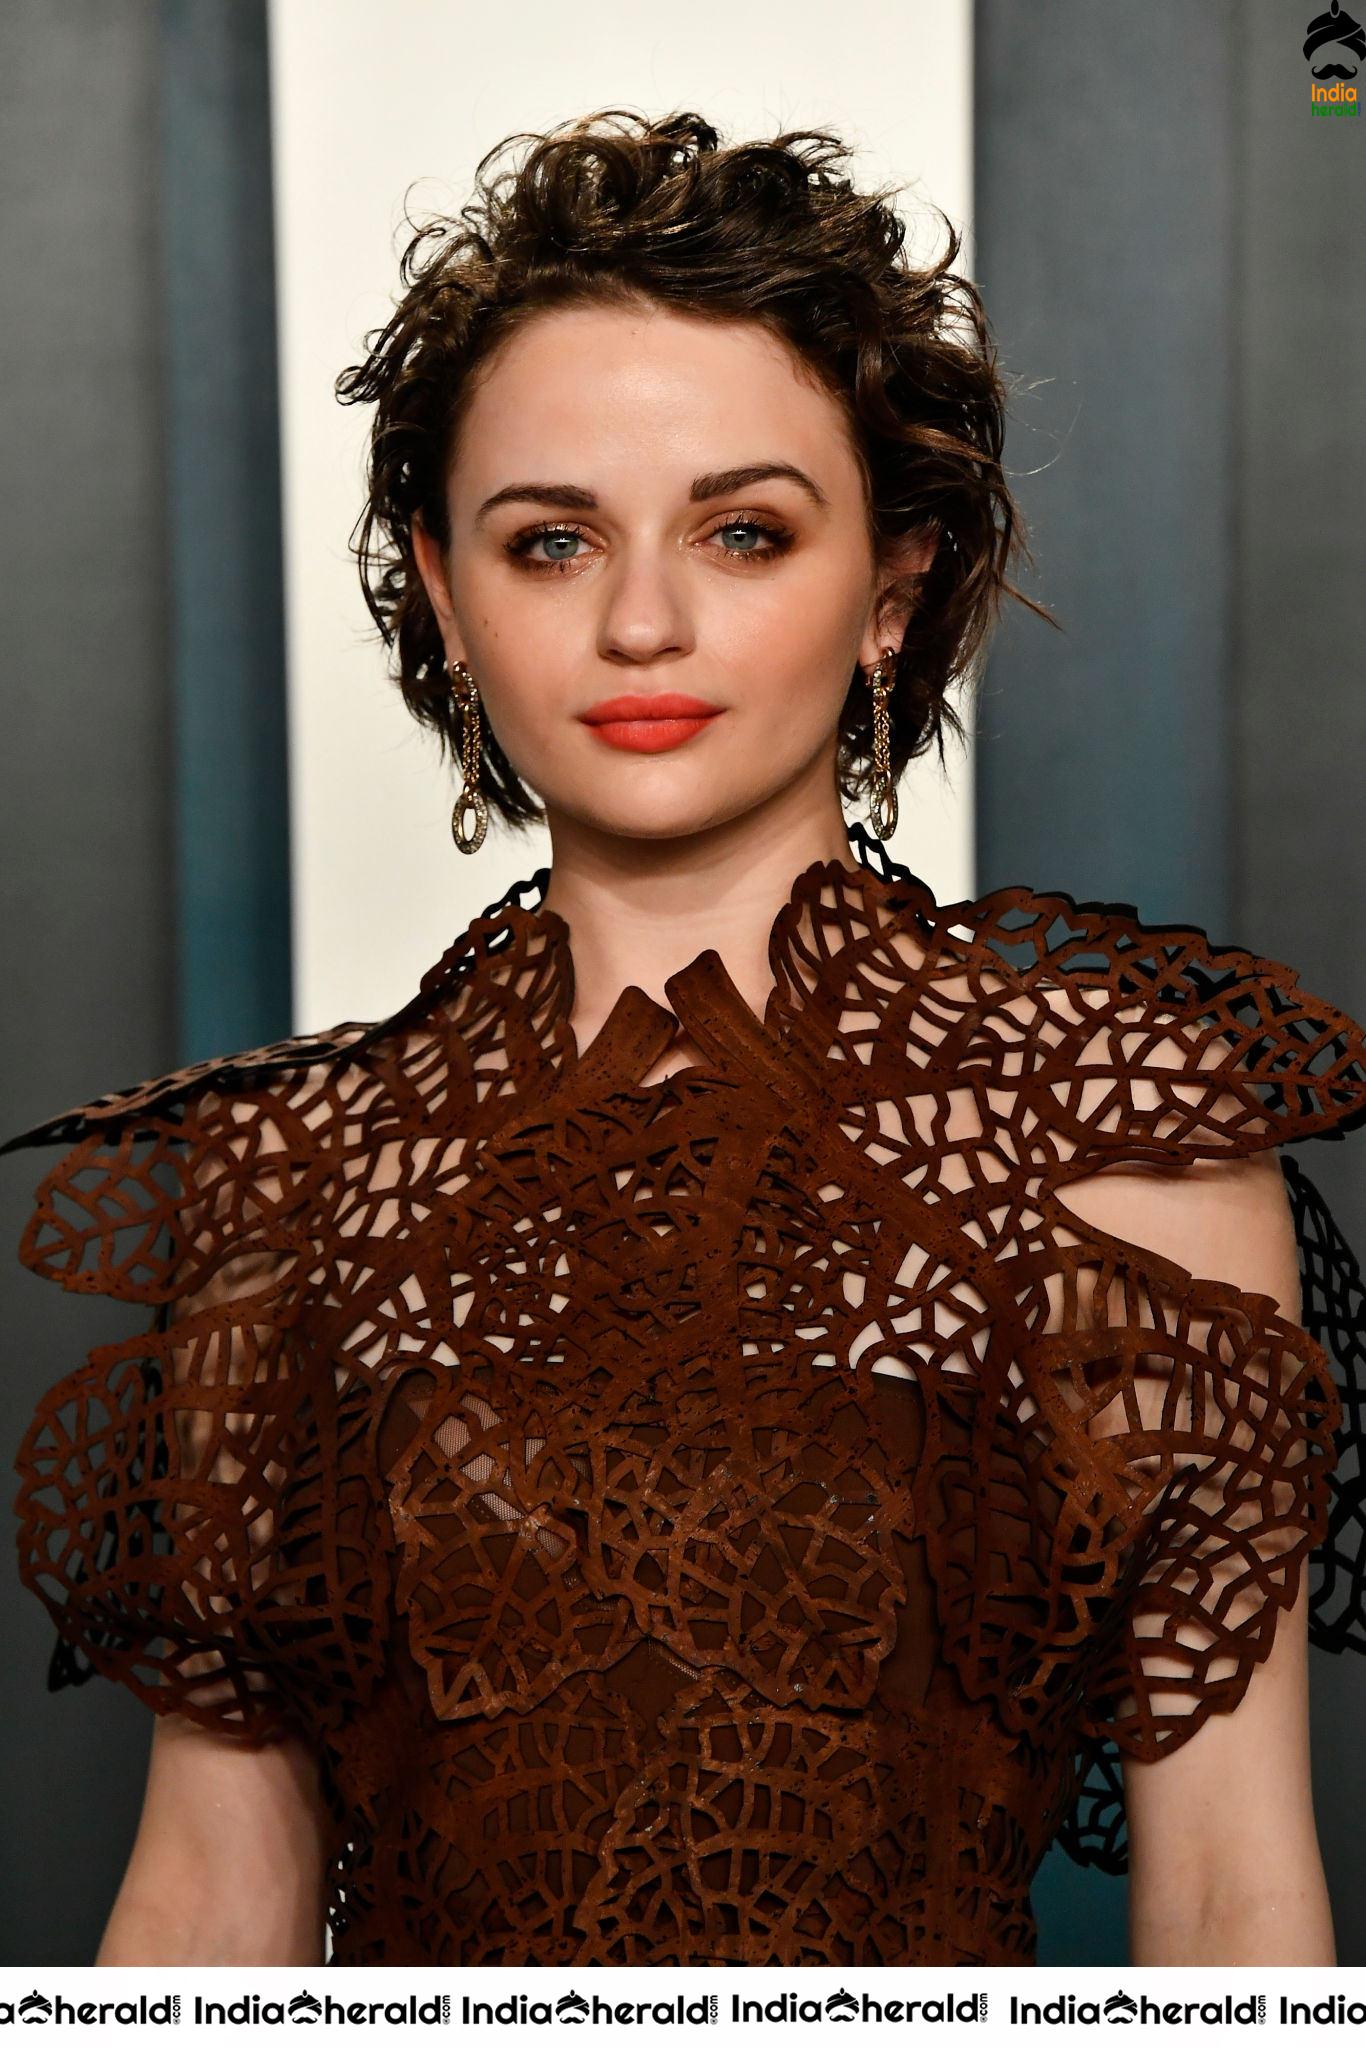 Joey King at Vanity Fair Oscar Party in Beverly Hills